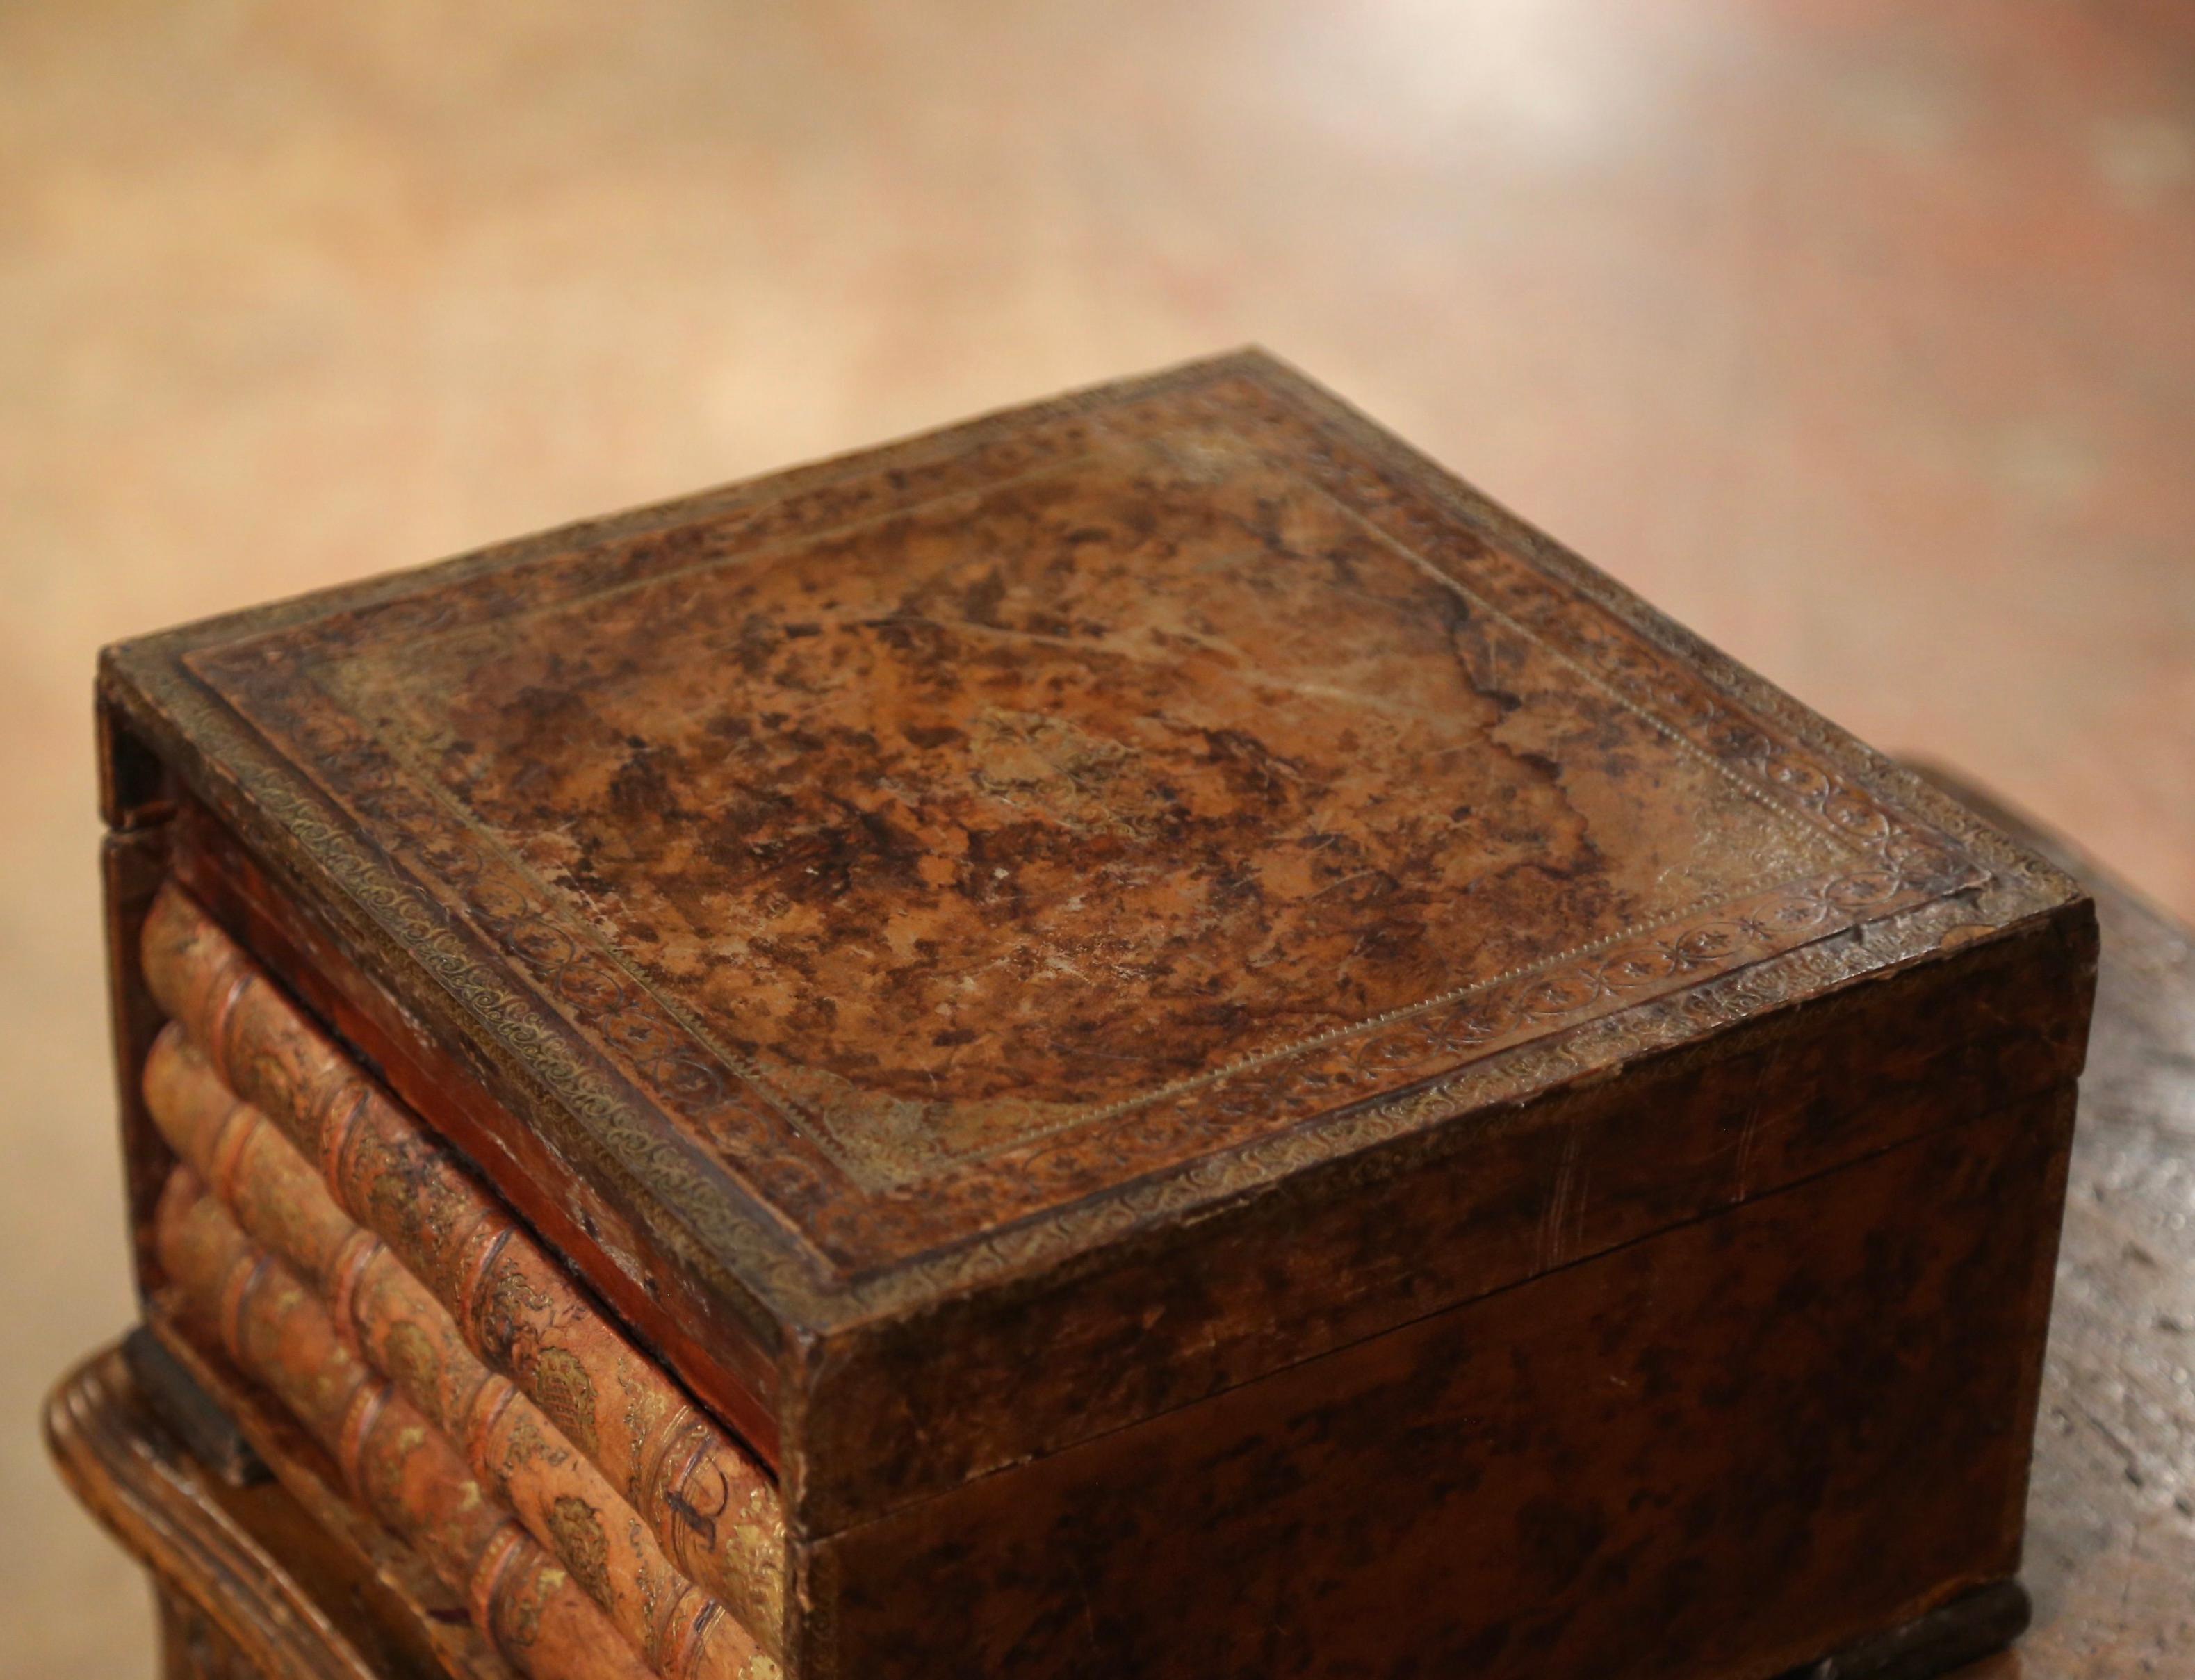 19th Century French Leather Bound Books Decorative Box with Hidden Drawer In Excellent Condition For Sale In Dallas, TX